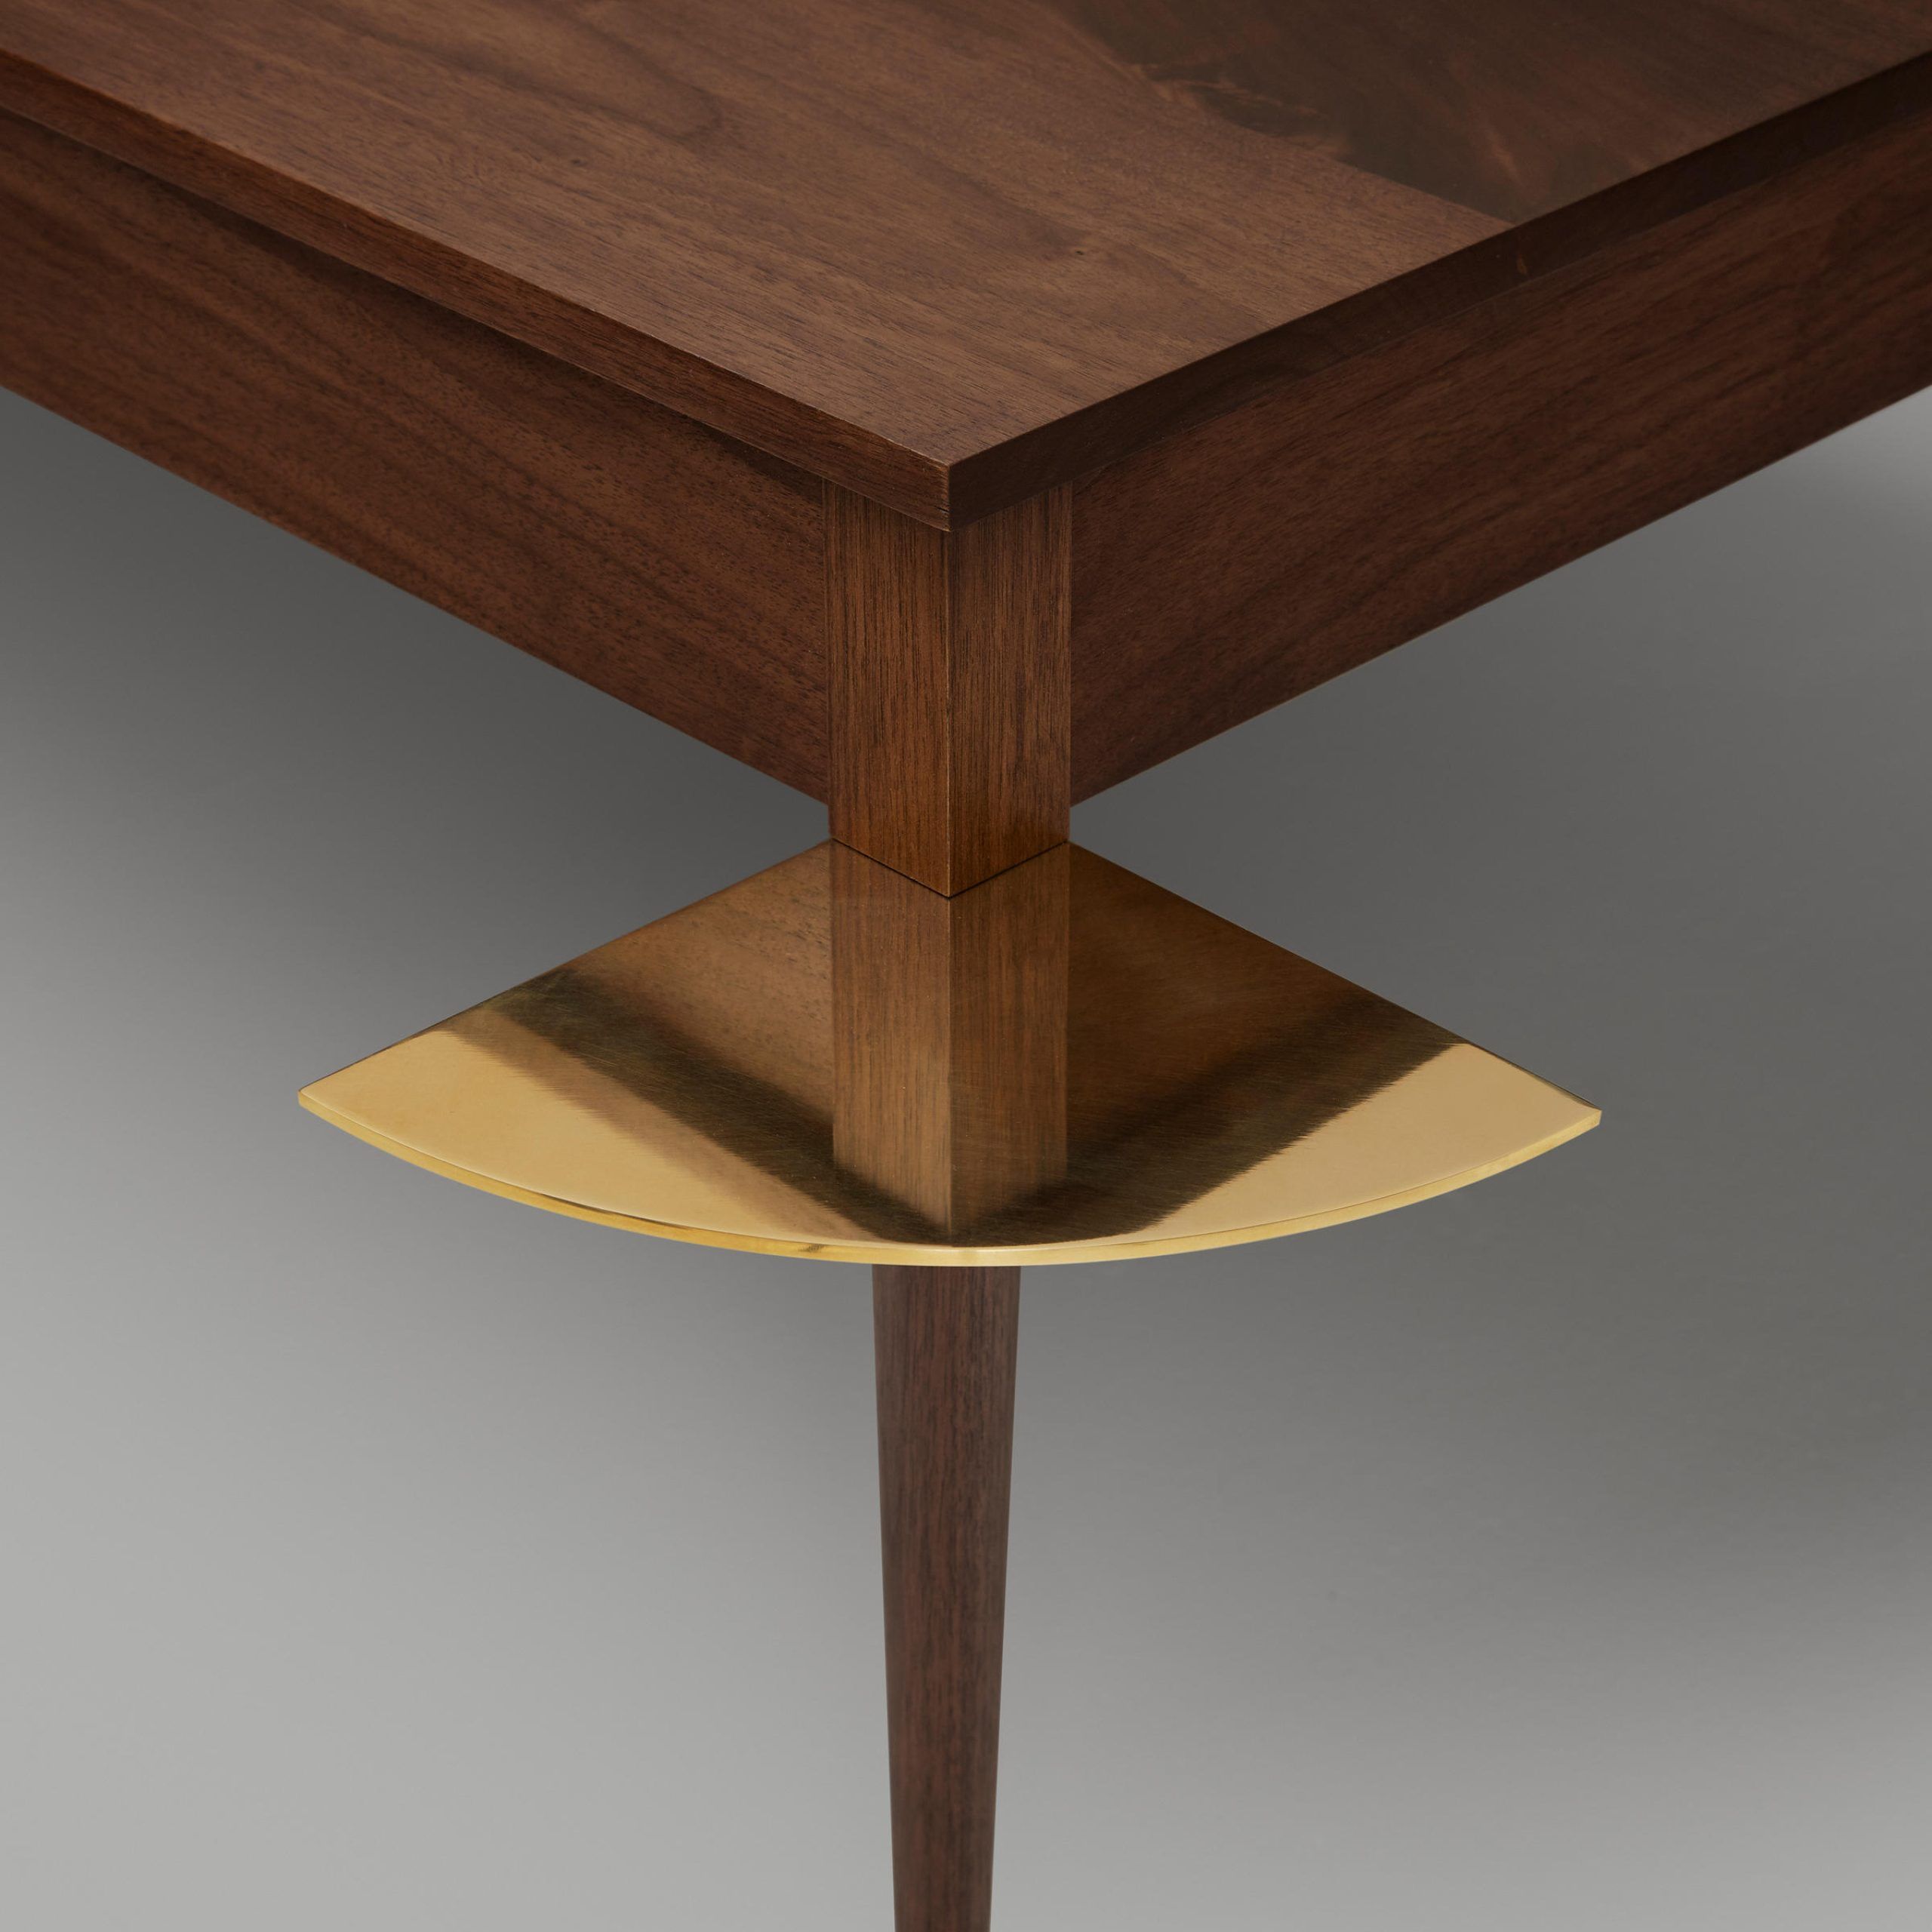 Architonic Throughout Most Recent Regency Cain Steel Coffee Tables (View 7 of 15)